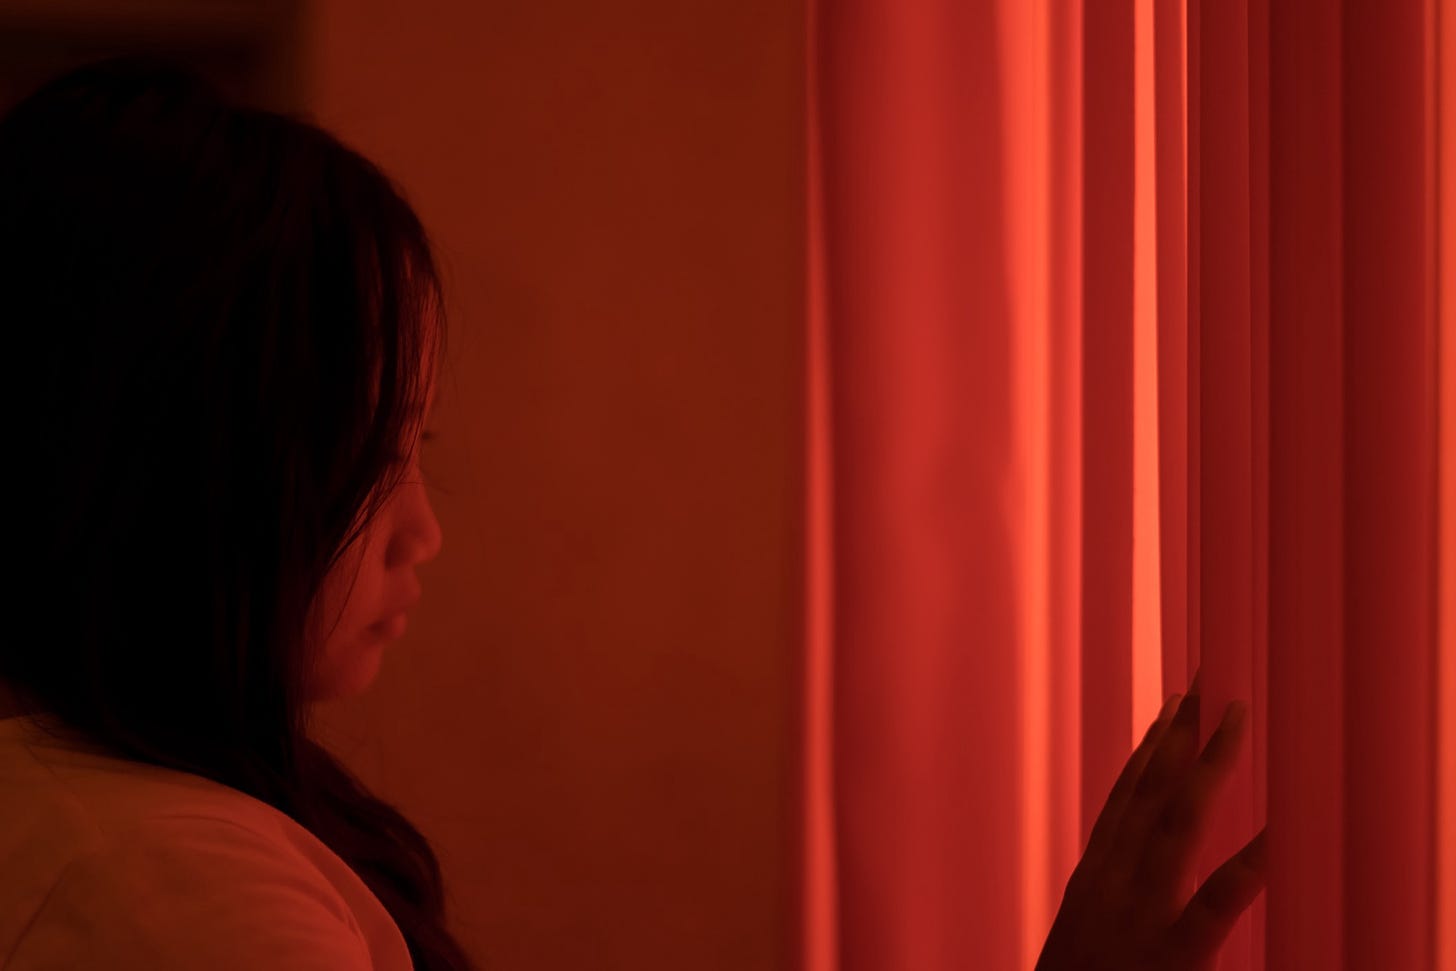 A young woman bathed in red light stares through a curtain.